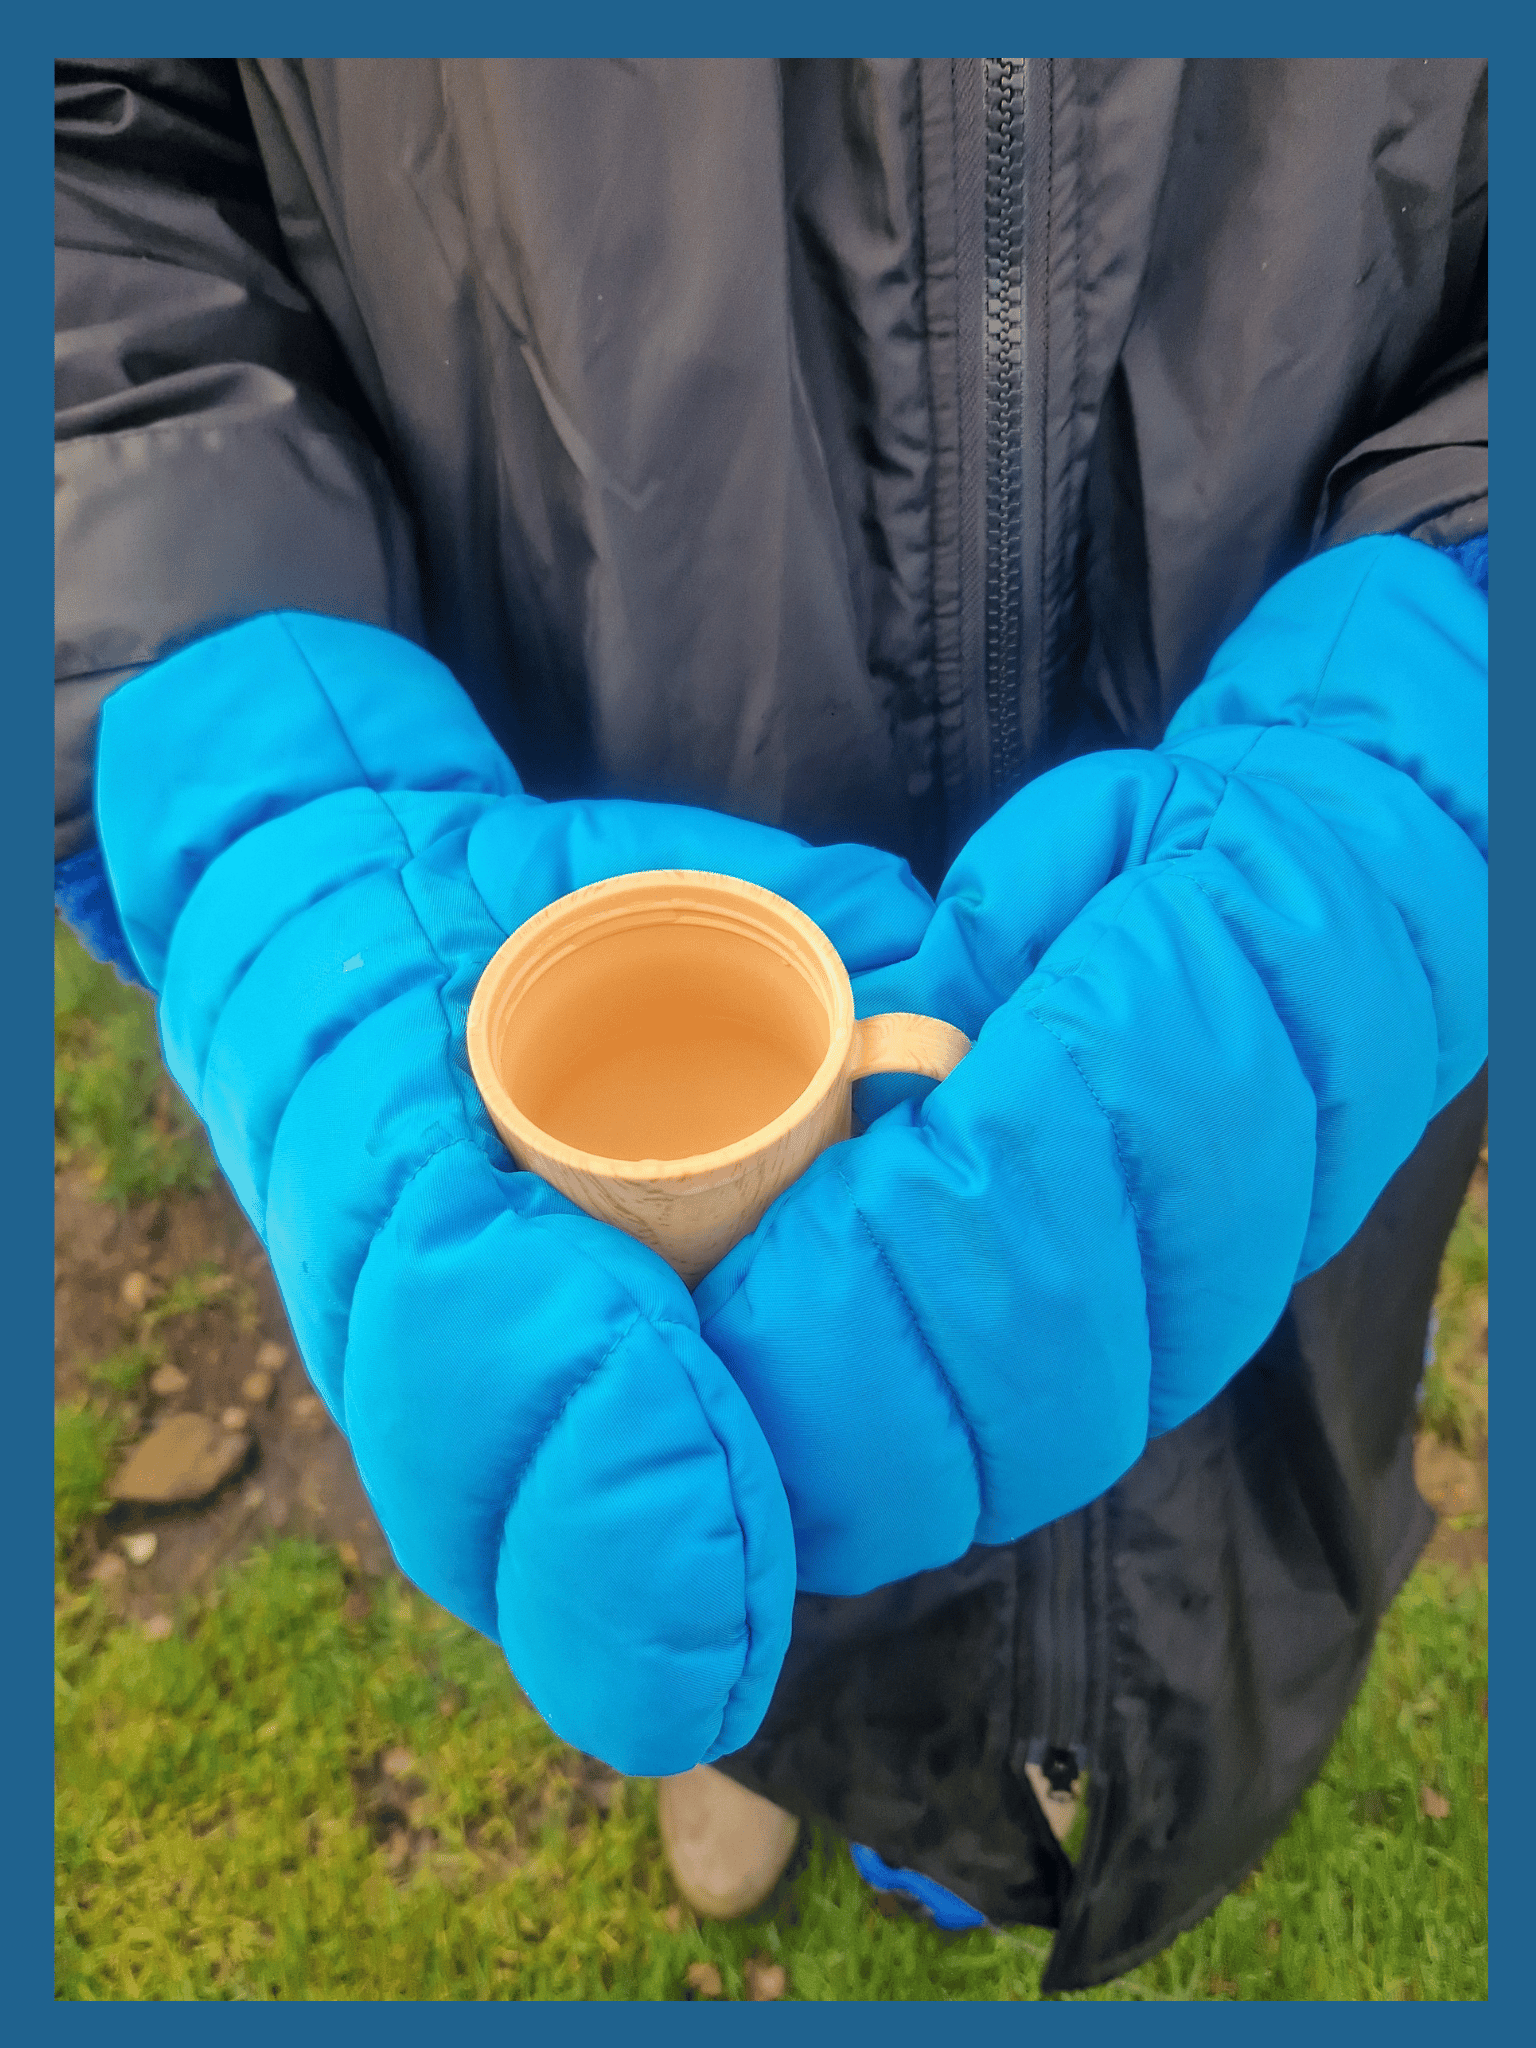 a close up shot of a pair of sky blue coloured, waterproof mittens. The mittens are cradling a cup.